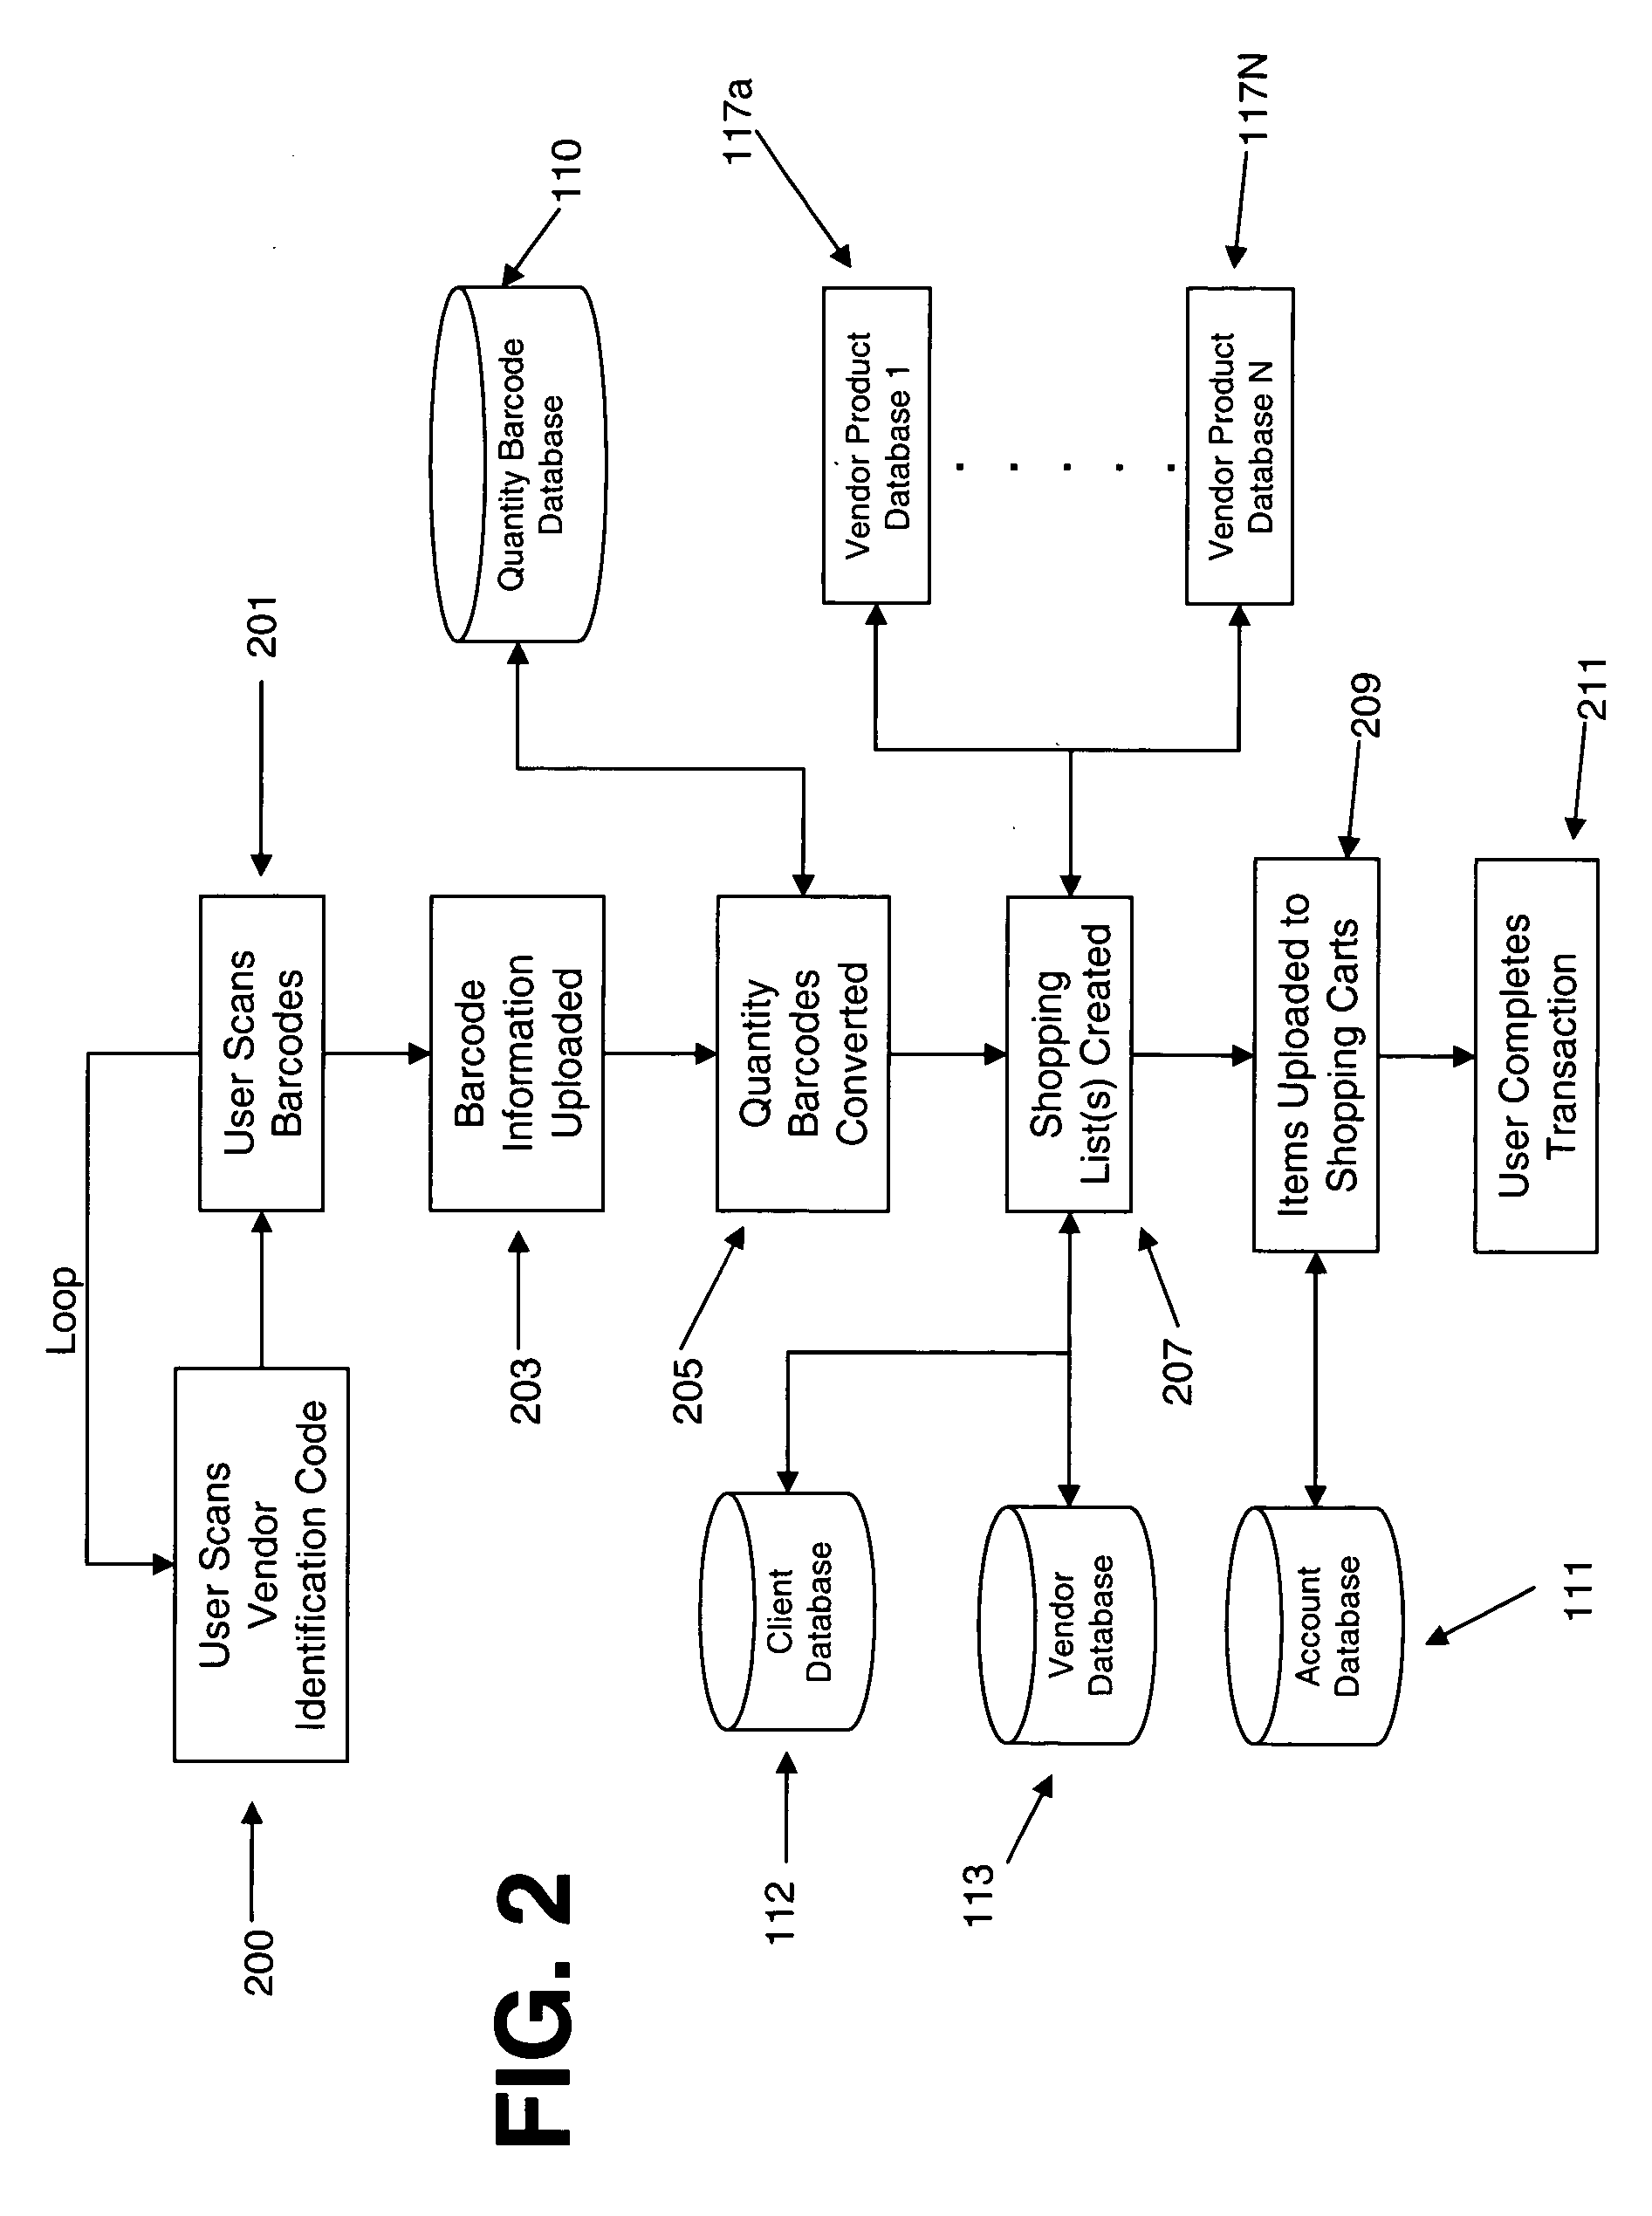 System and method for aggregating and managing client orders using barcode scanning technology